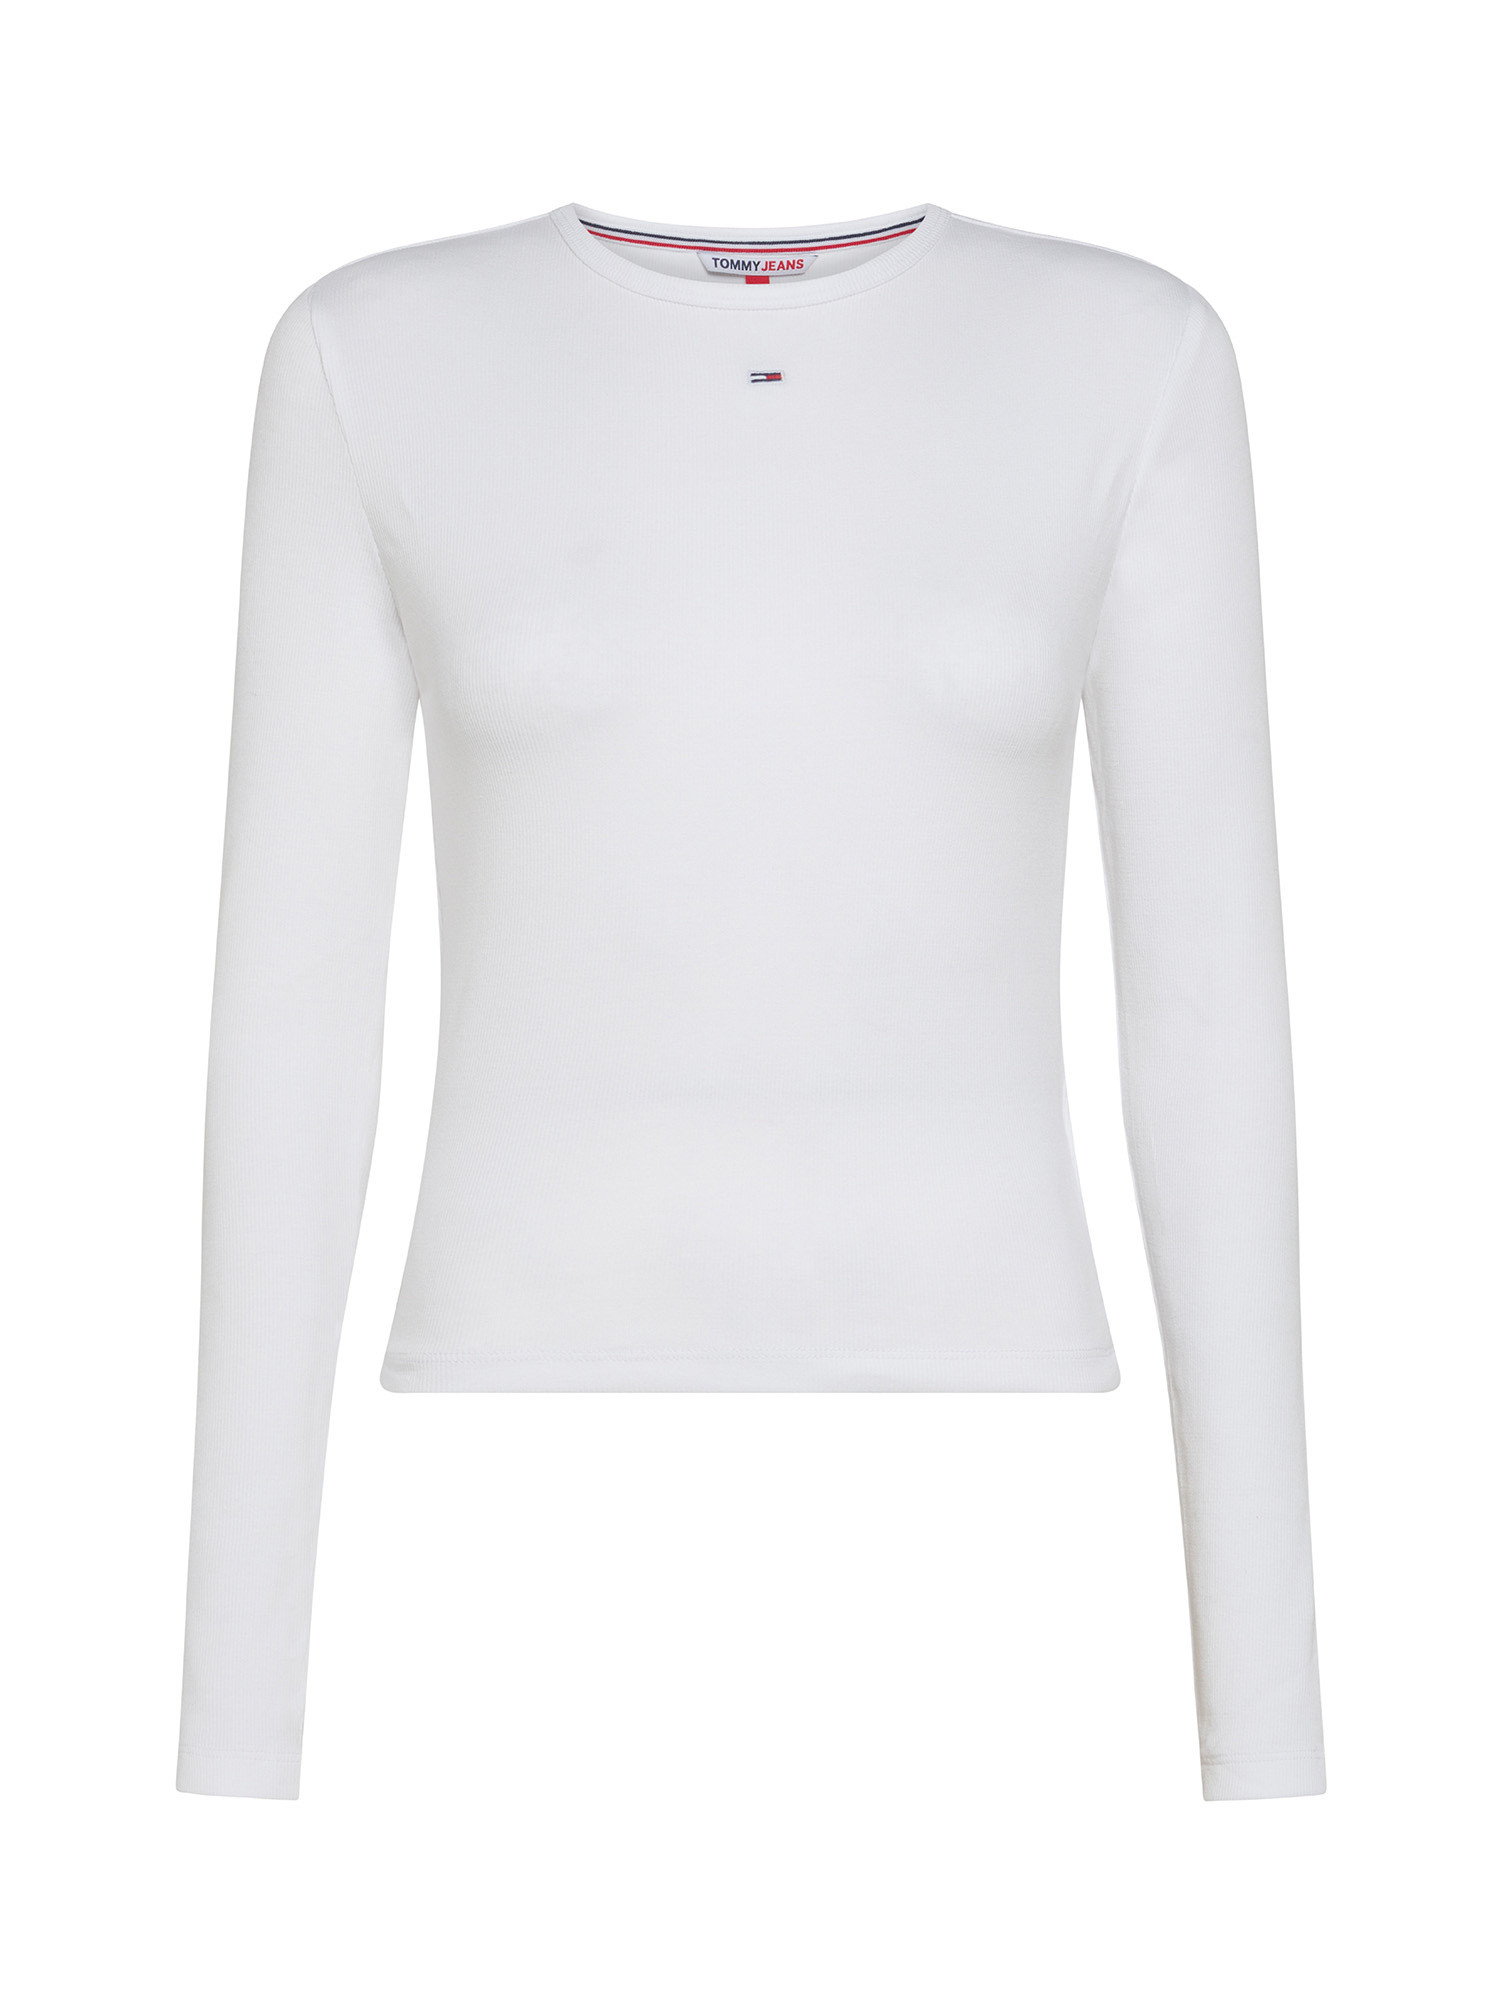 Tommy Jeans - Cotton crew neck sweater with logo, White, large image number 0